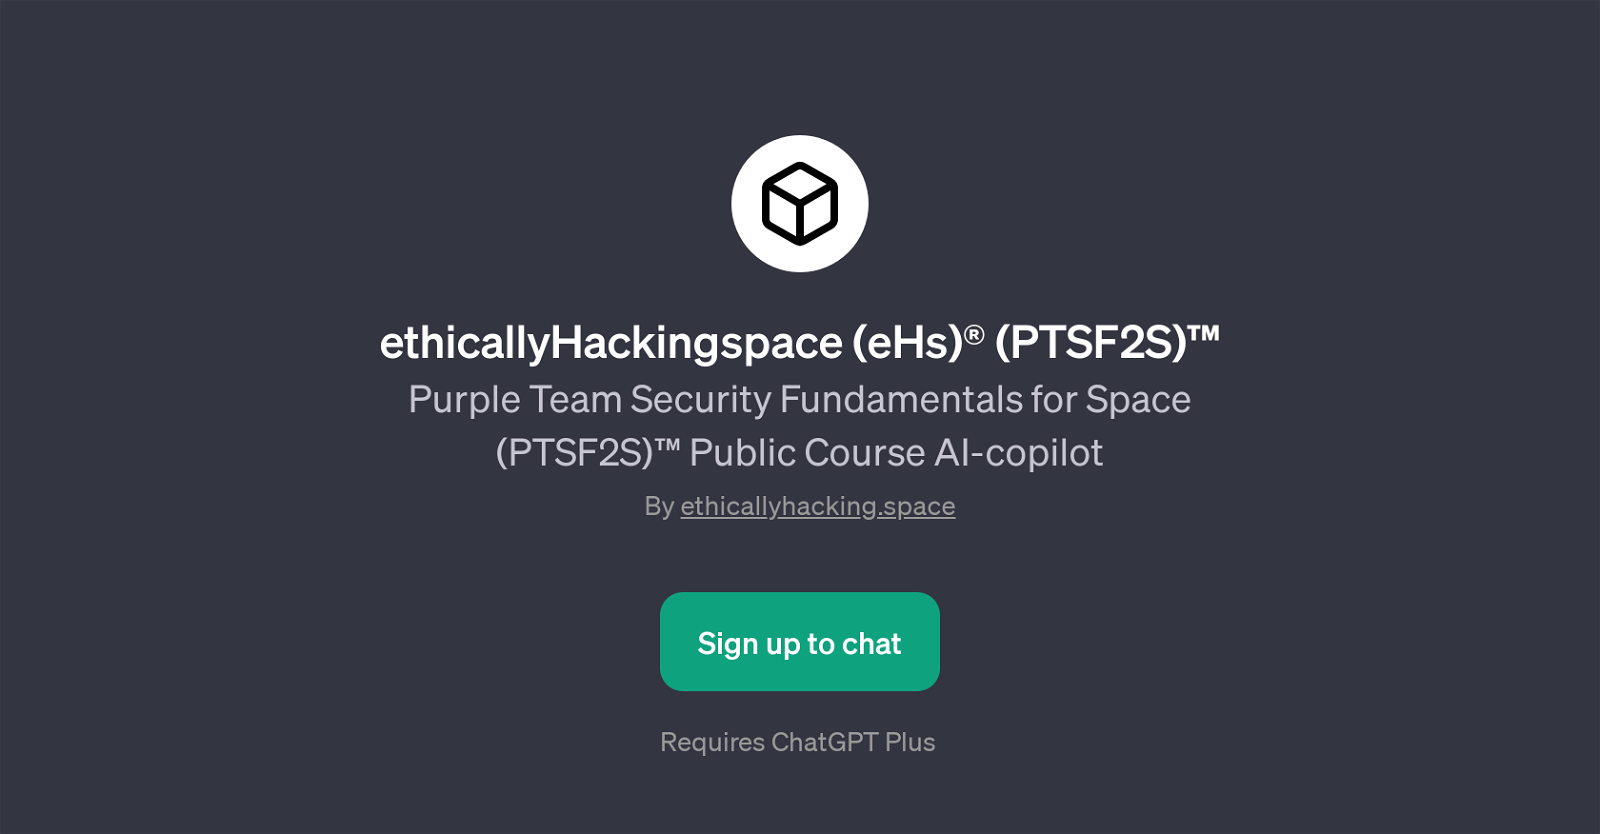 ethicallyHackingspace (eHs) (PTSF2S) website